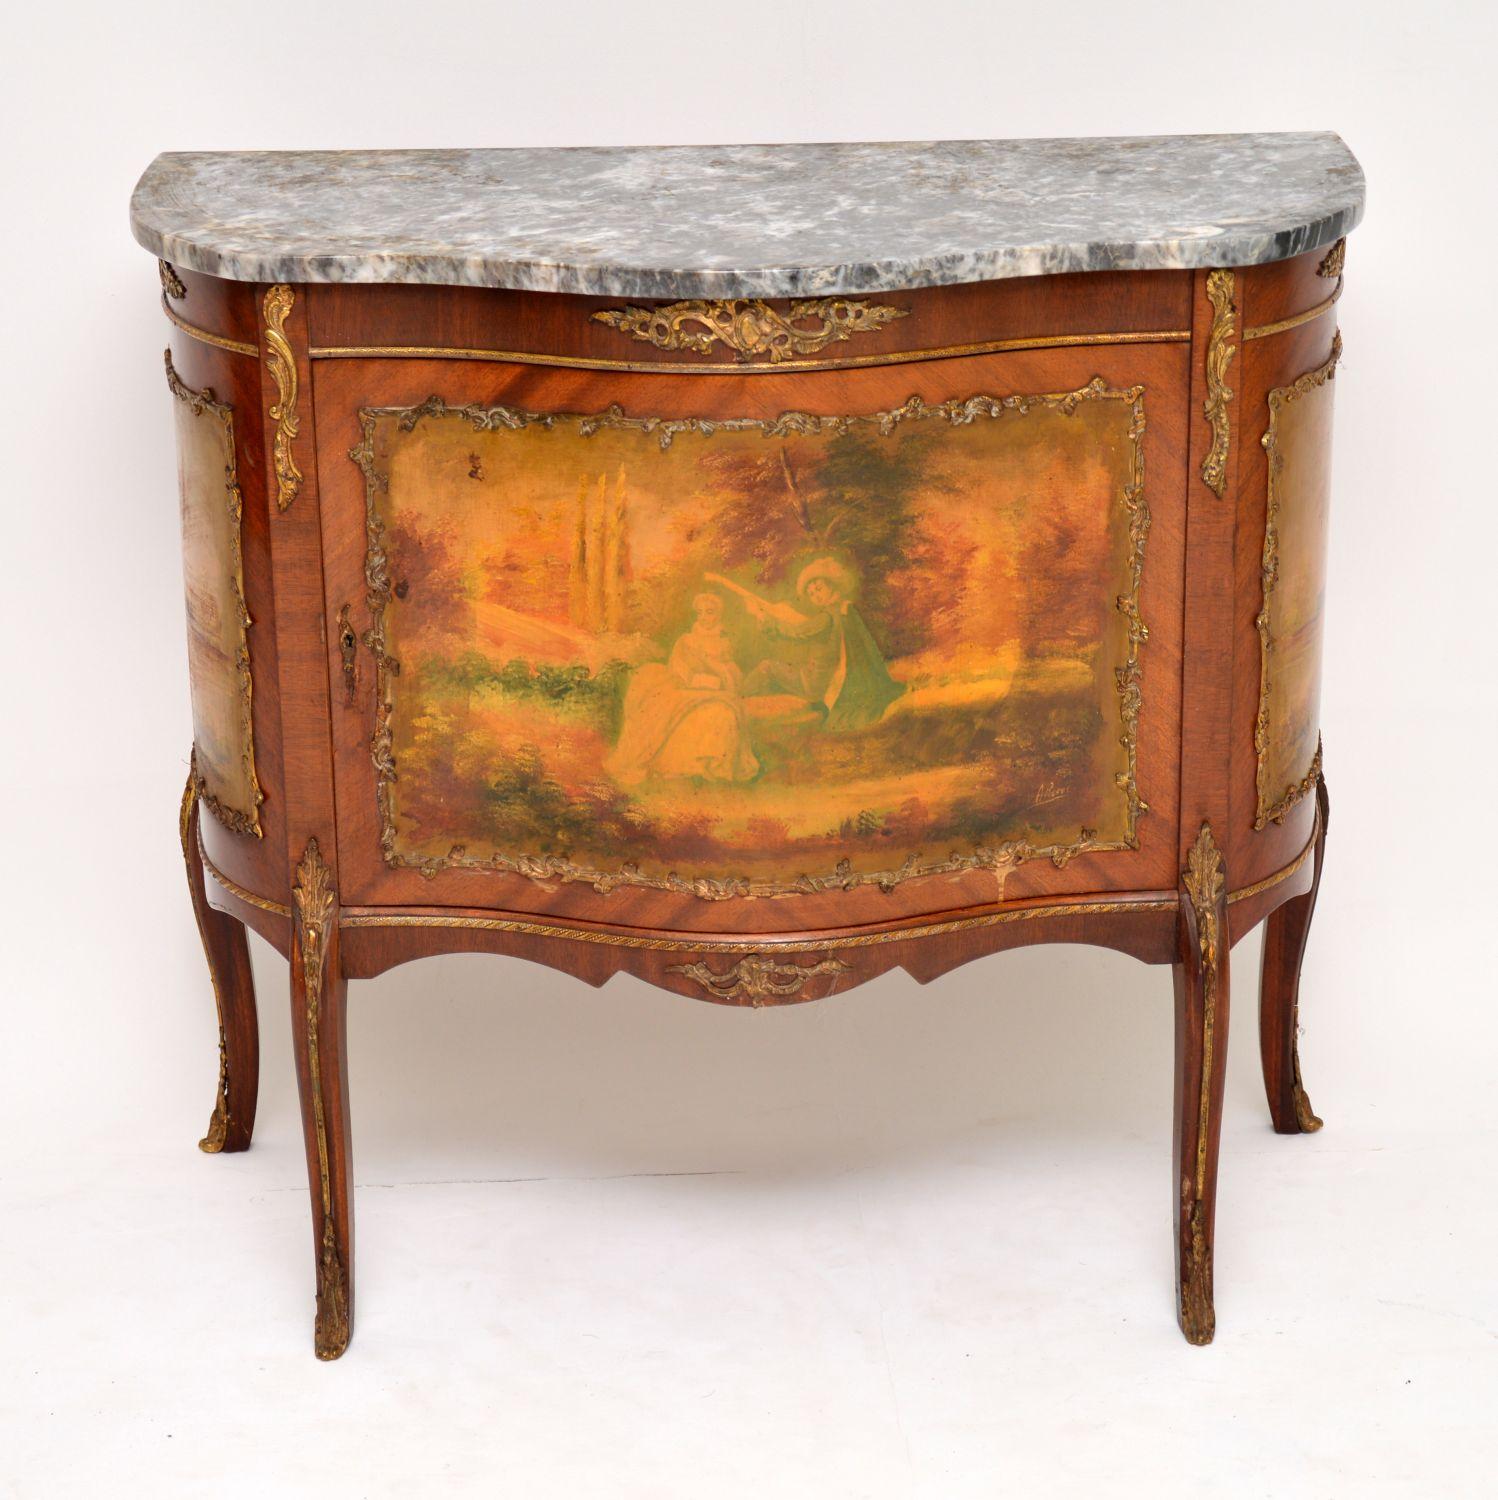 Antique French serpentine fronted marble top cabinet with decorative scenes on all three panels and in good original condition. It’s mahogany with the original marble top and gilt bronze mounts all over, which are well cast. There is plenty of